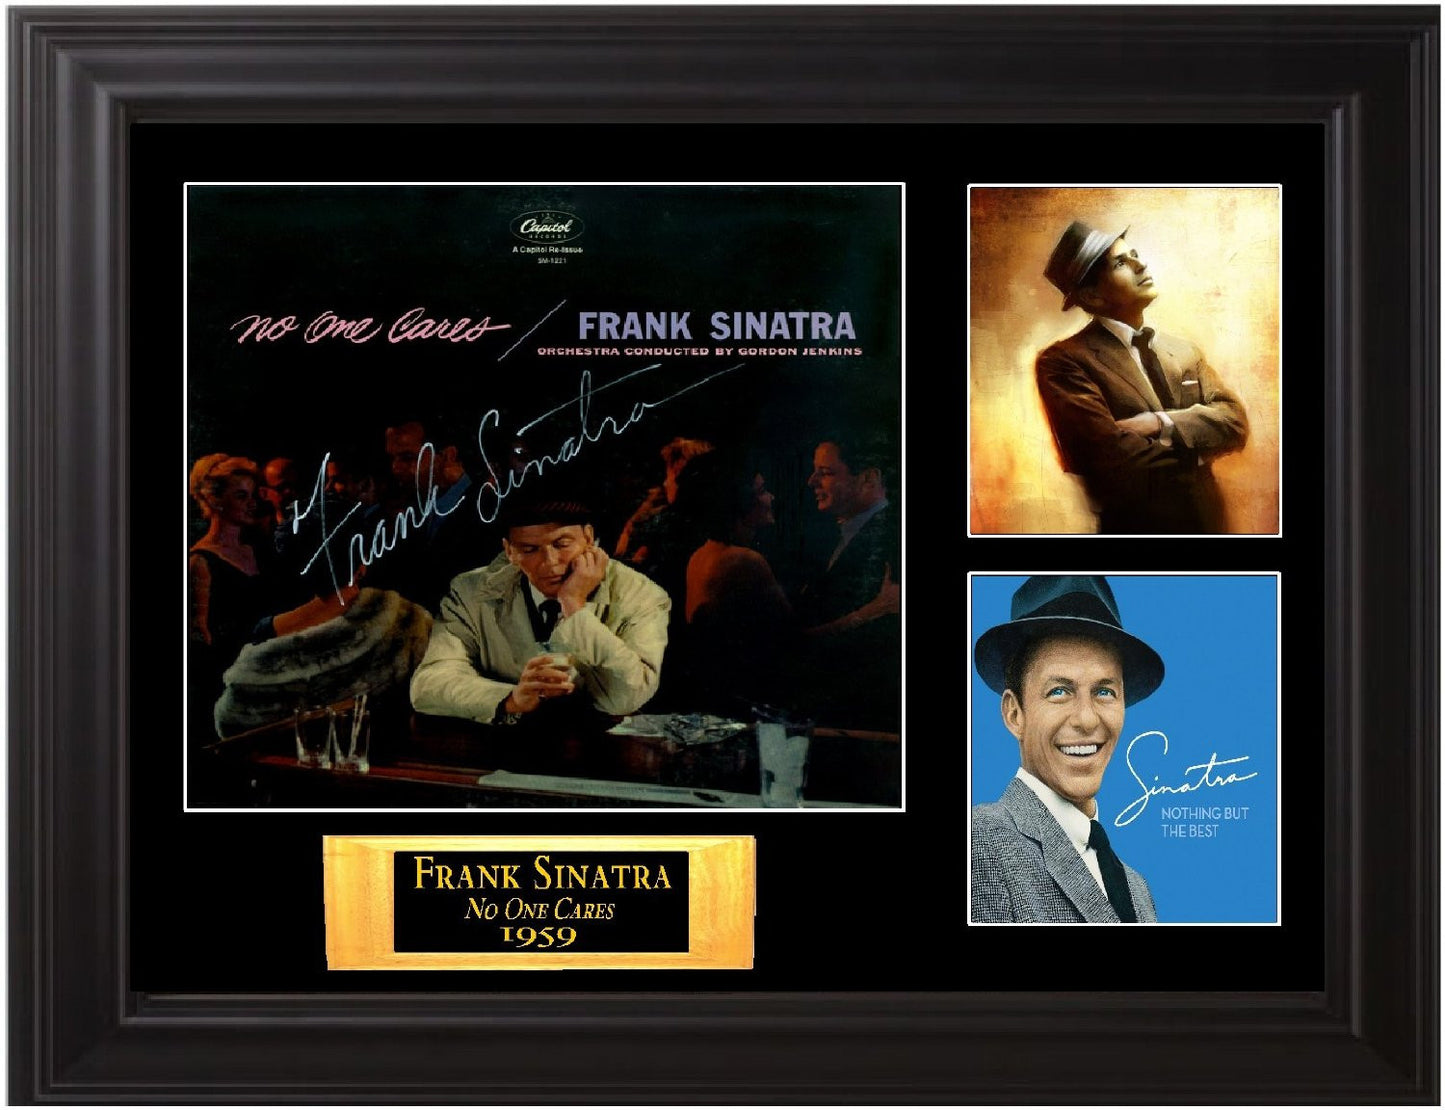 Frank Sinatra Signed No One Cares Lp - Zion Graphic Collectibles